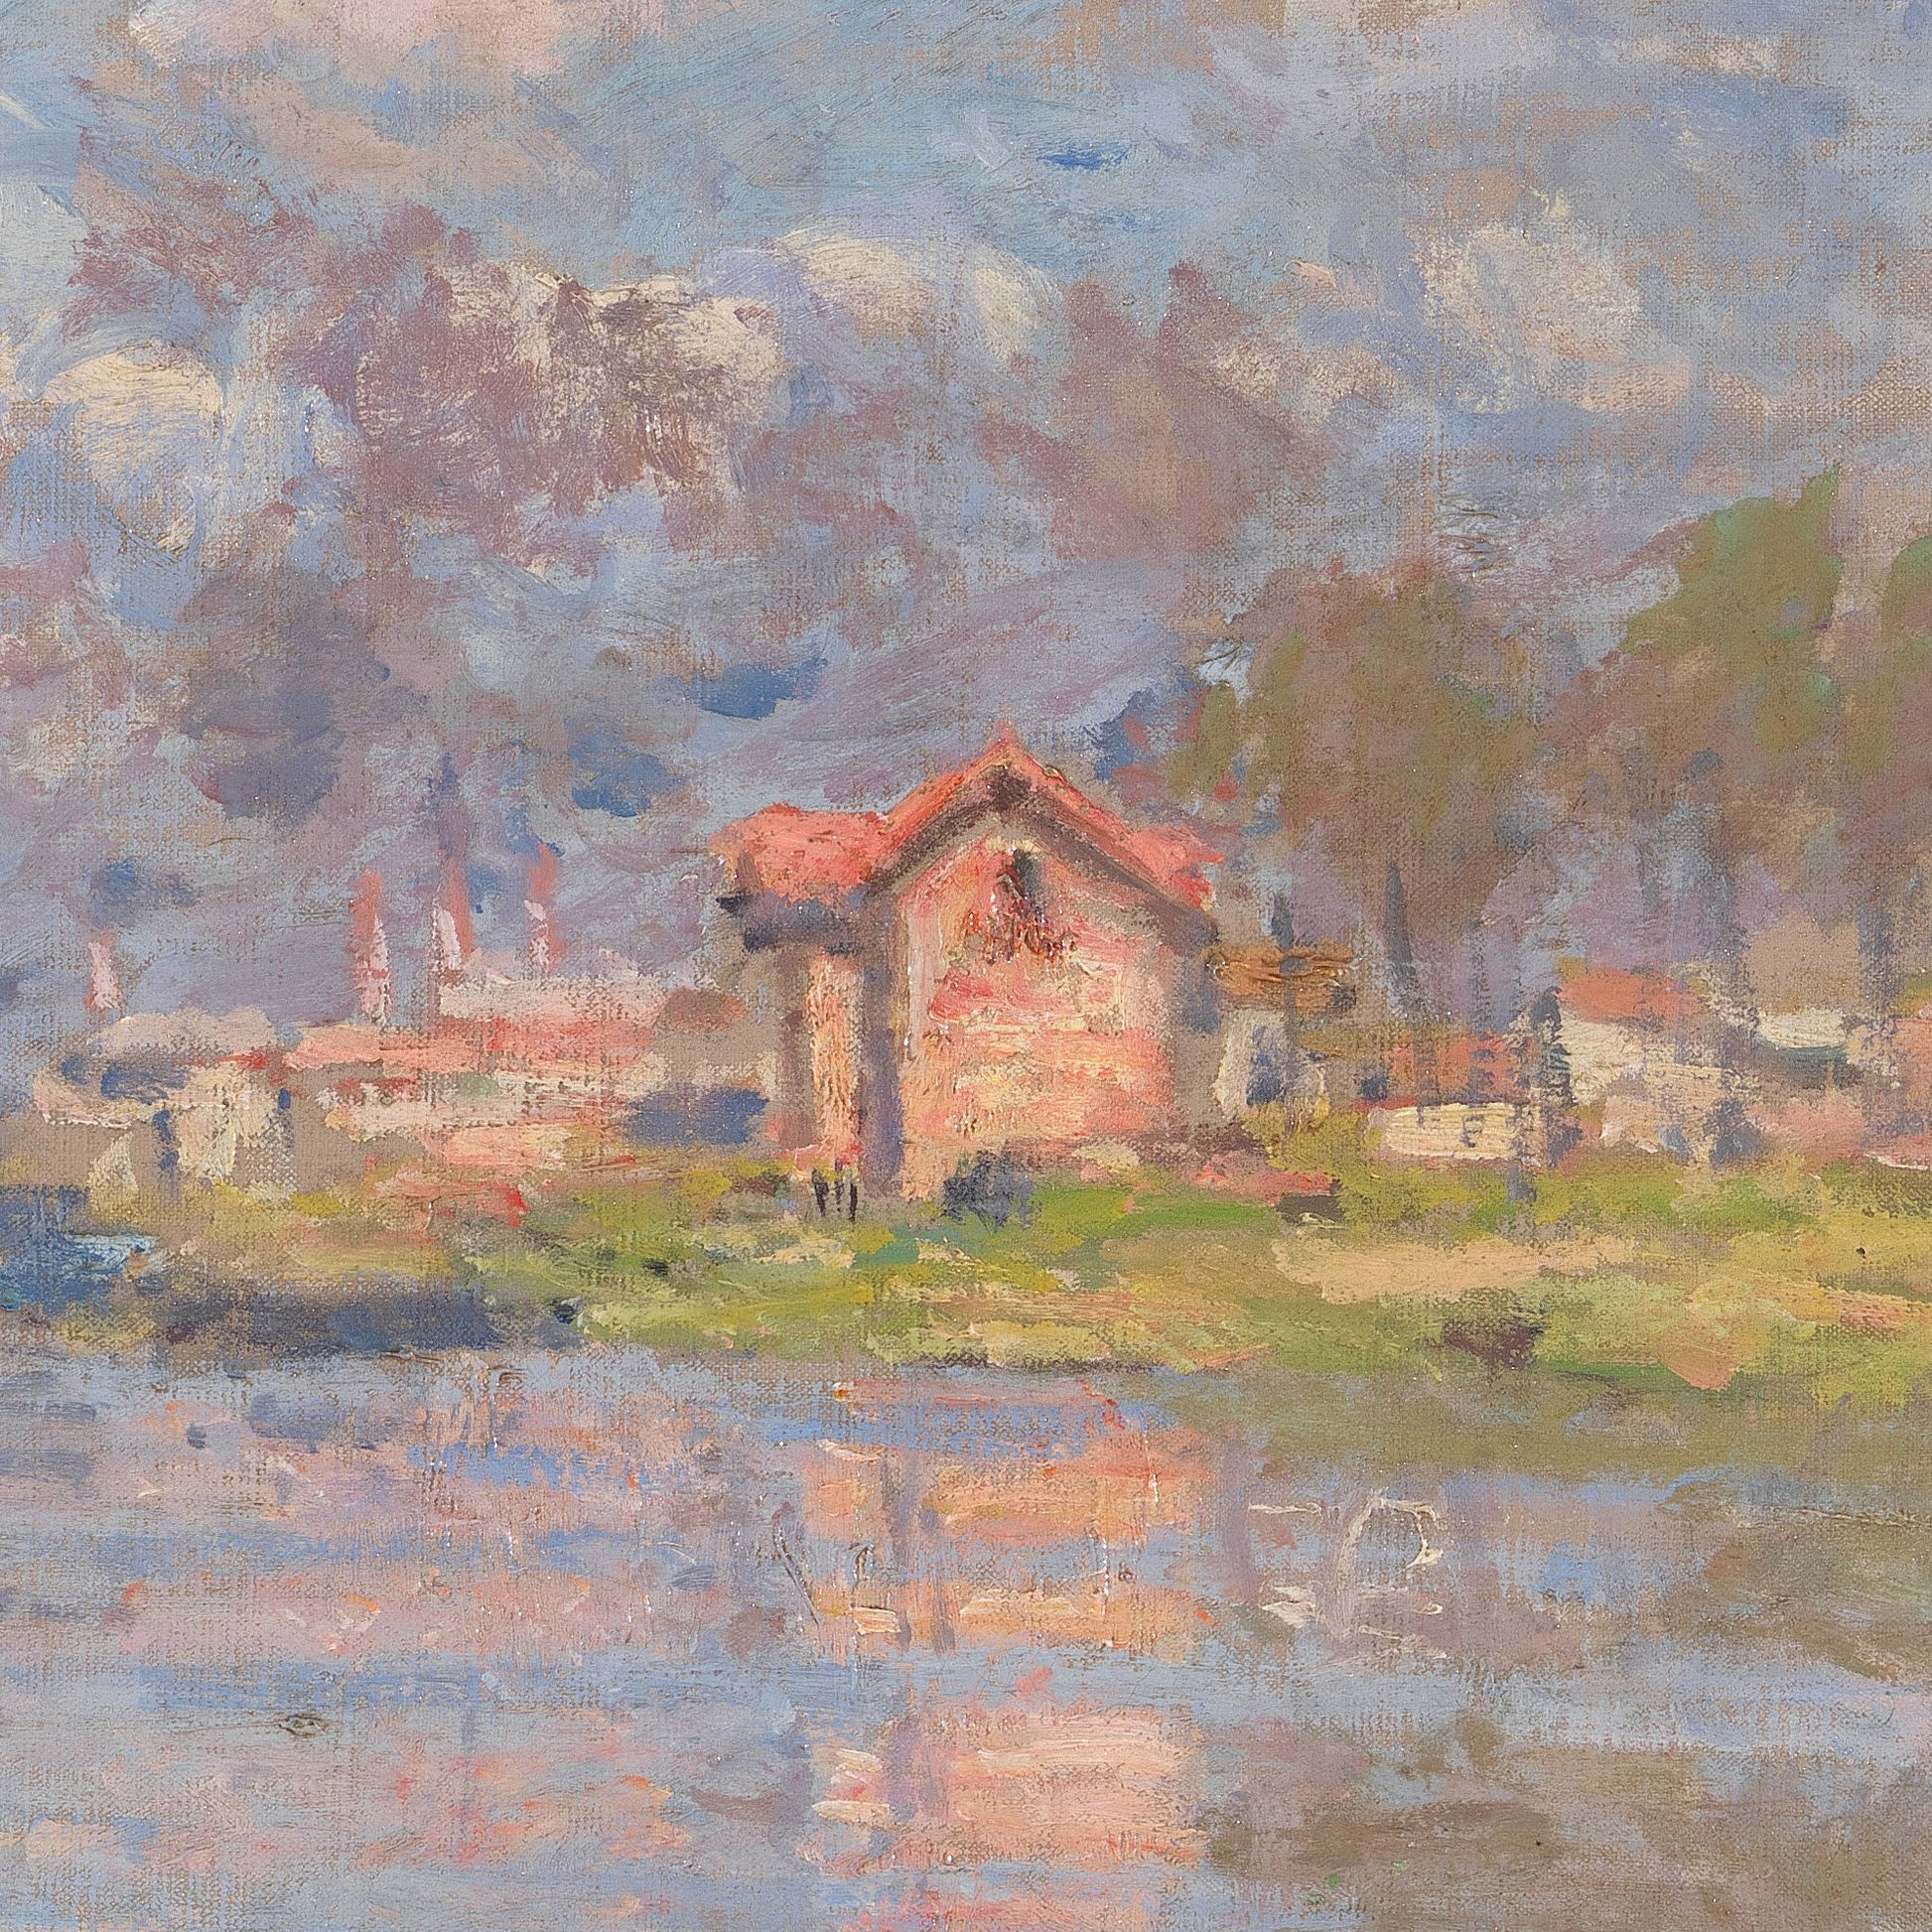 Spring by the Seine by Claude Monet, 3d Printed with texture and brush strokes looks like original oil-painting, code:389